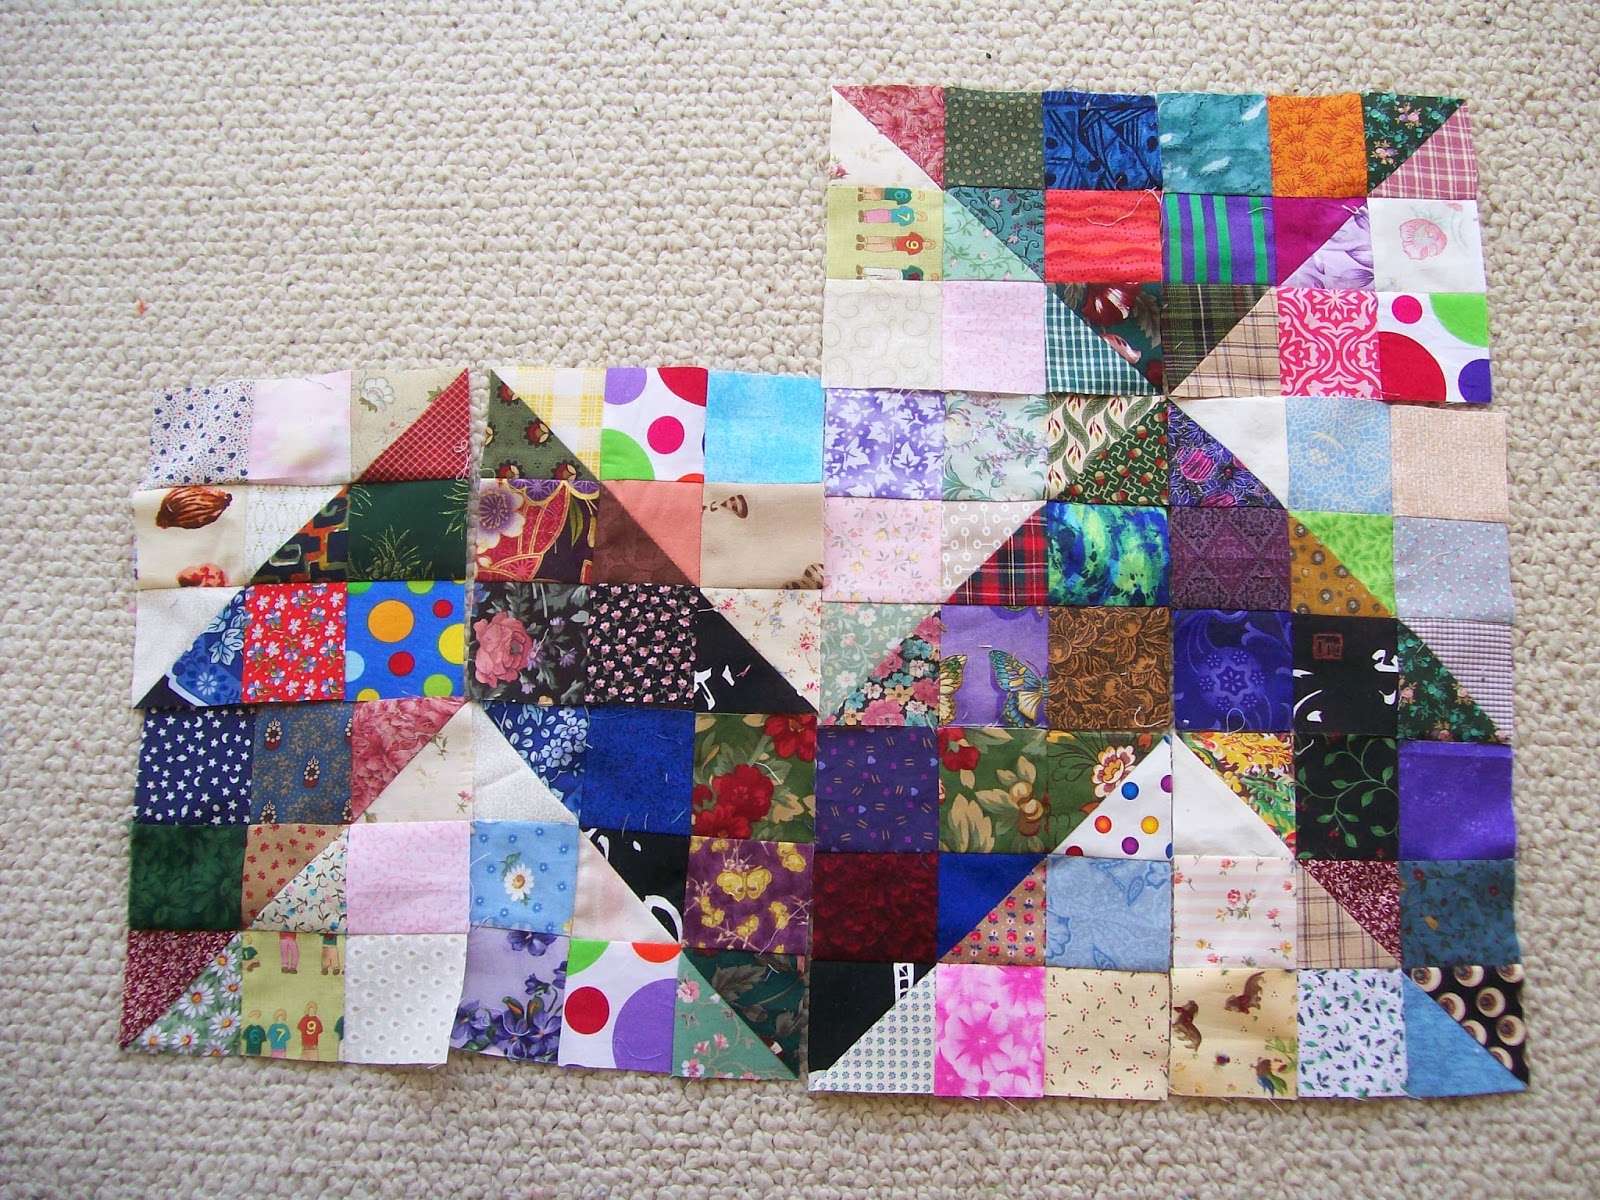 Sew Many Quilts - Too Little Time: October 2013